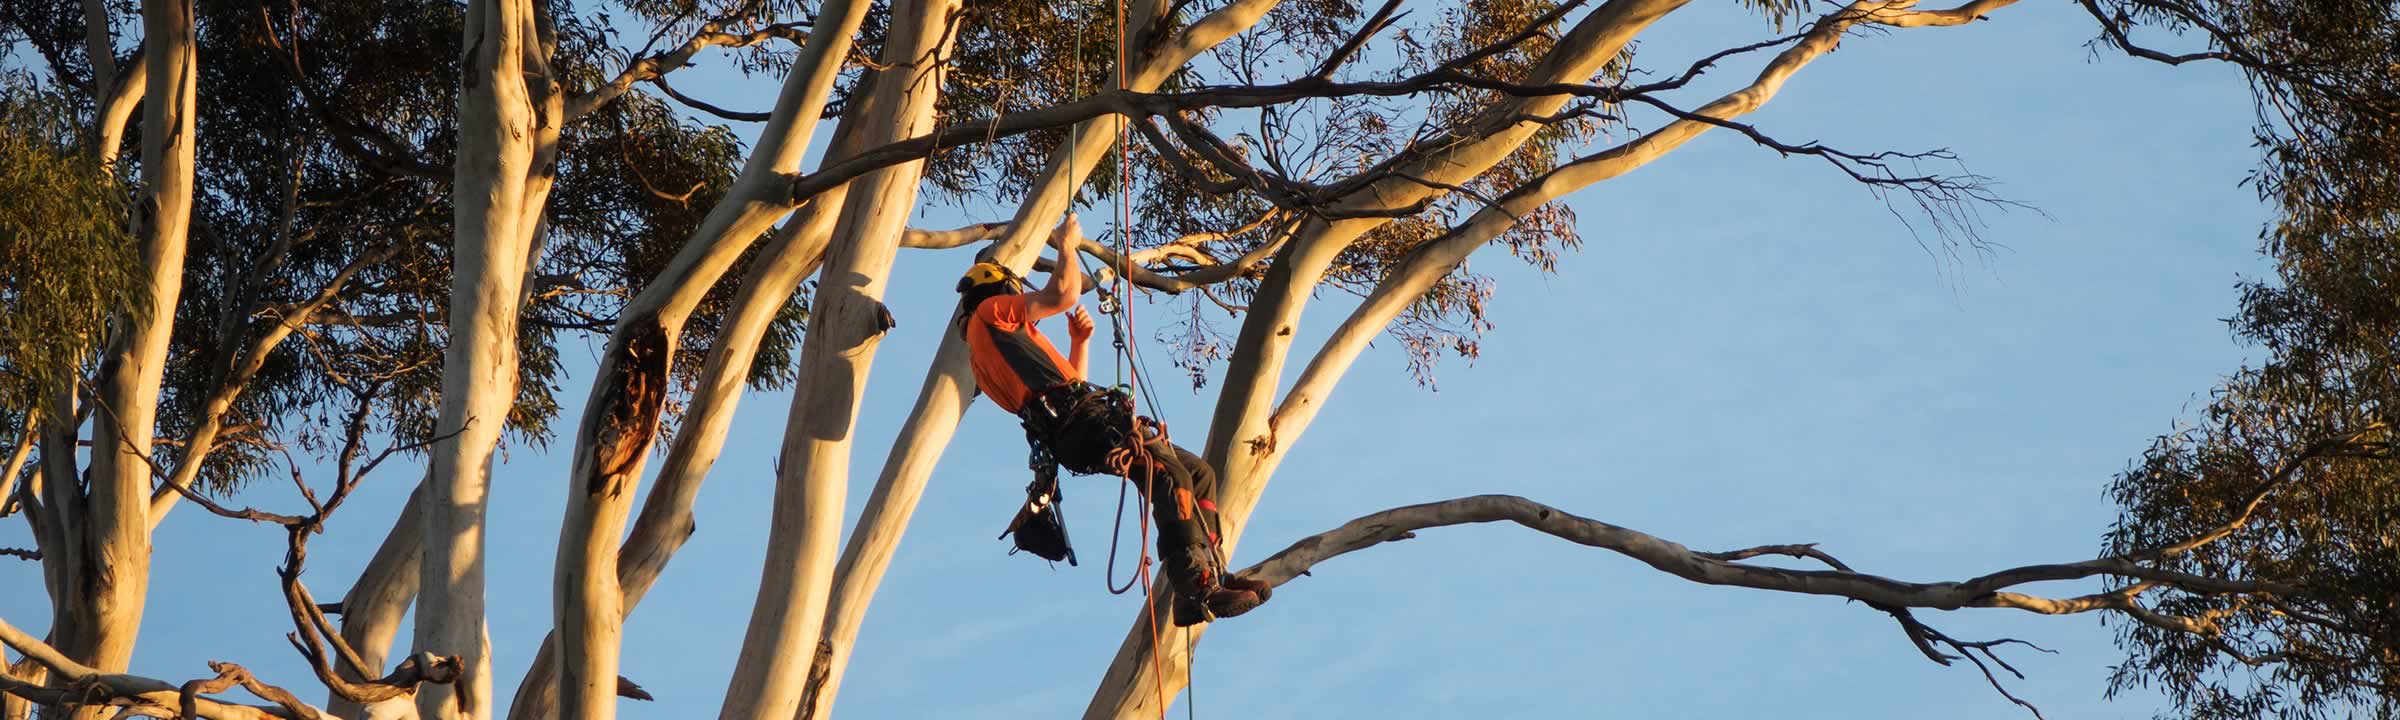 Arborist at work removing branches.